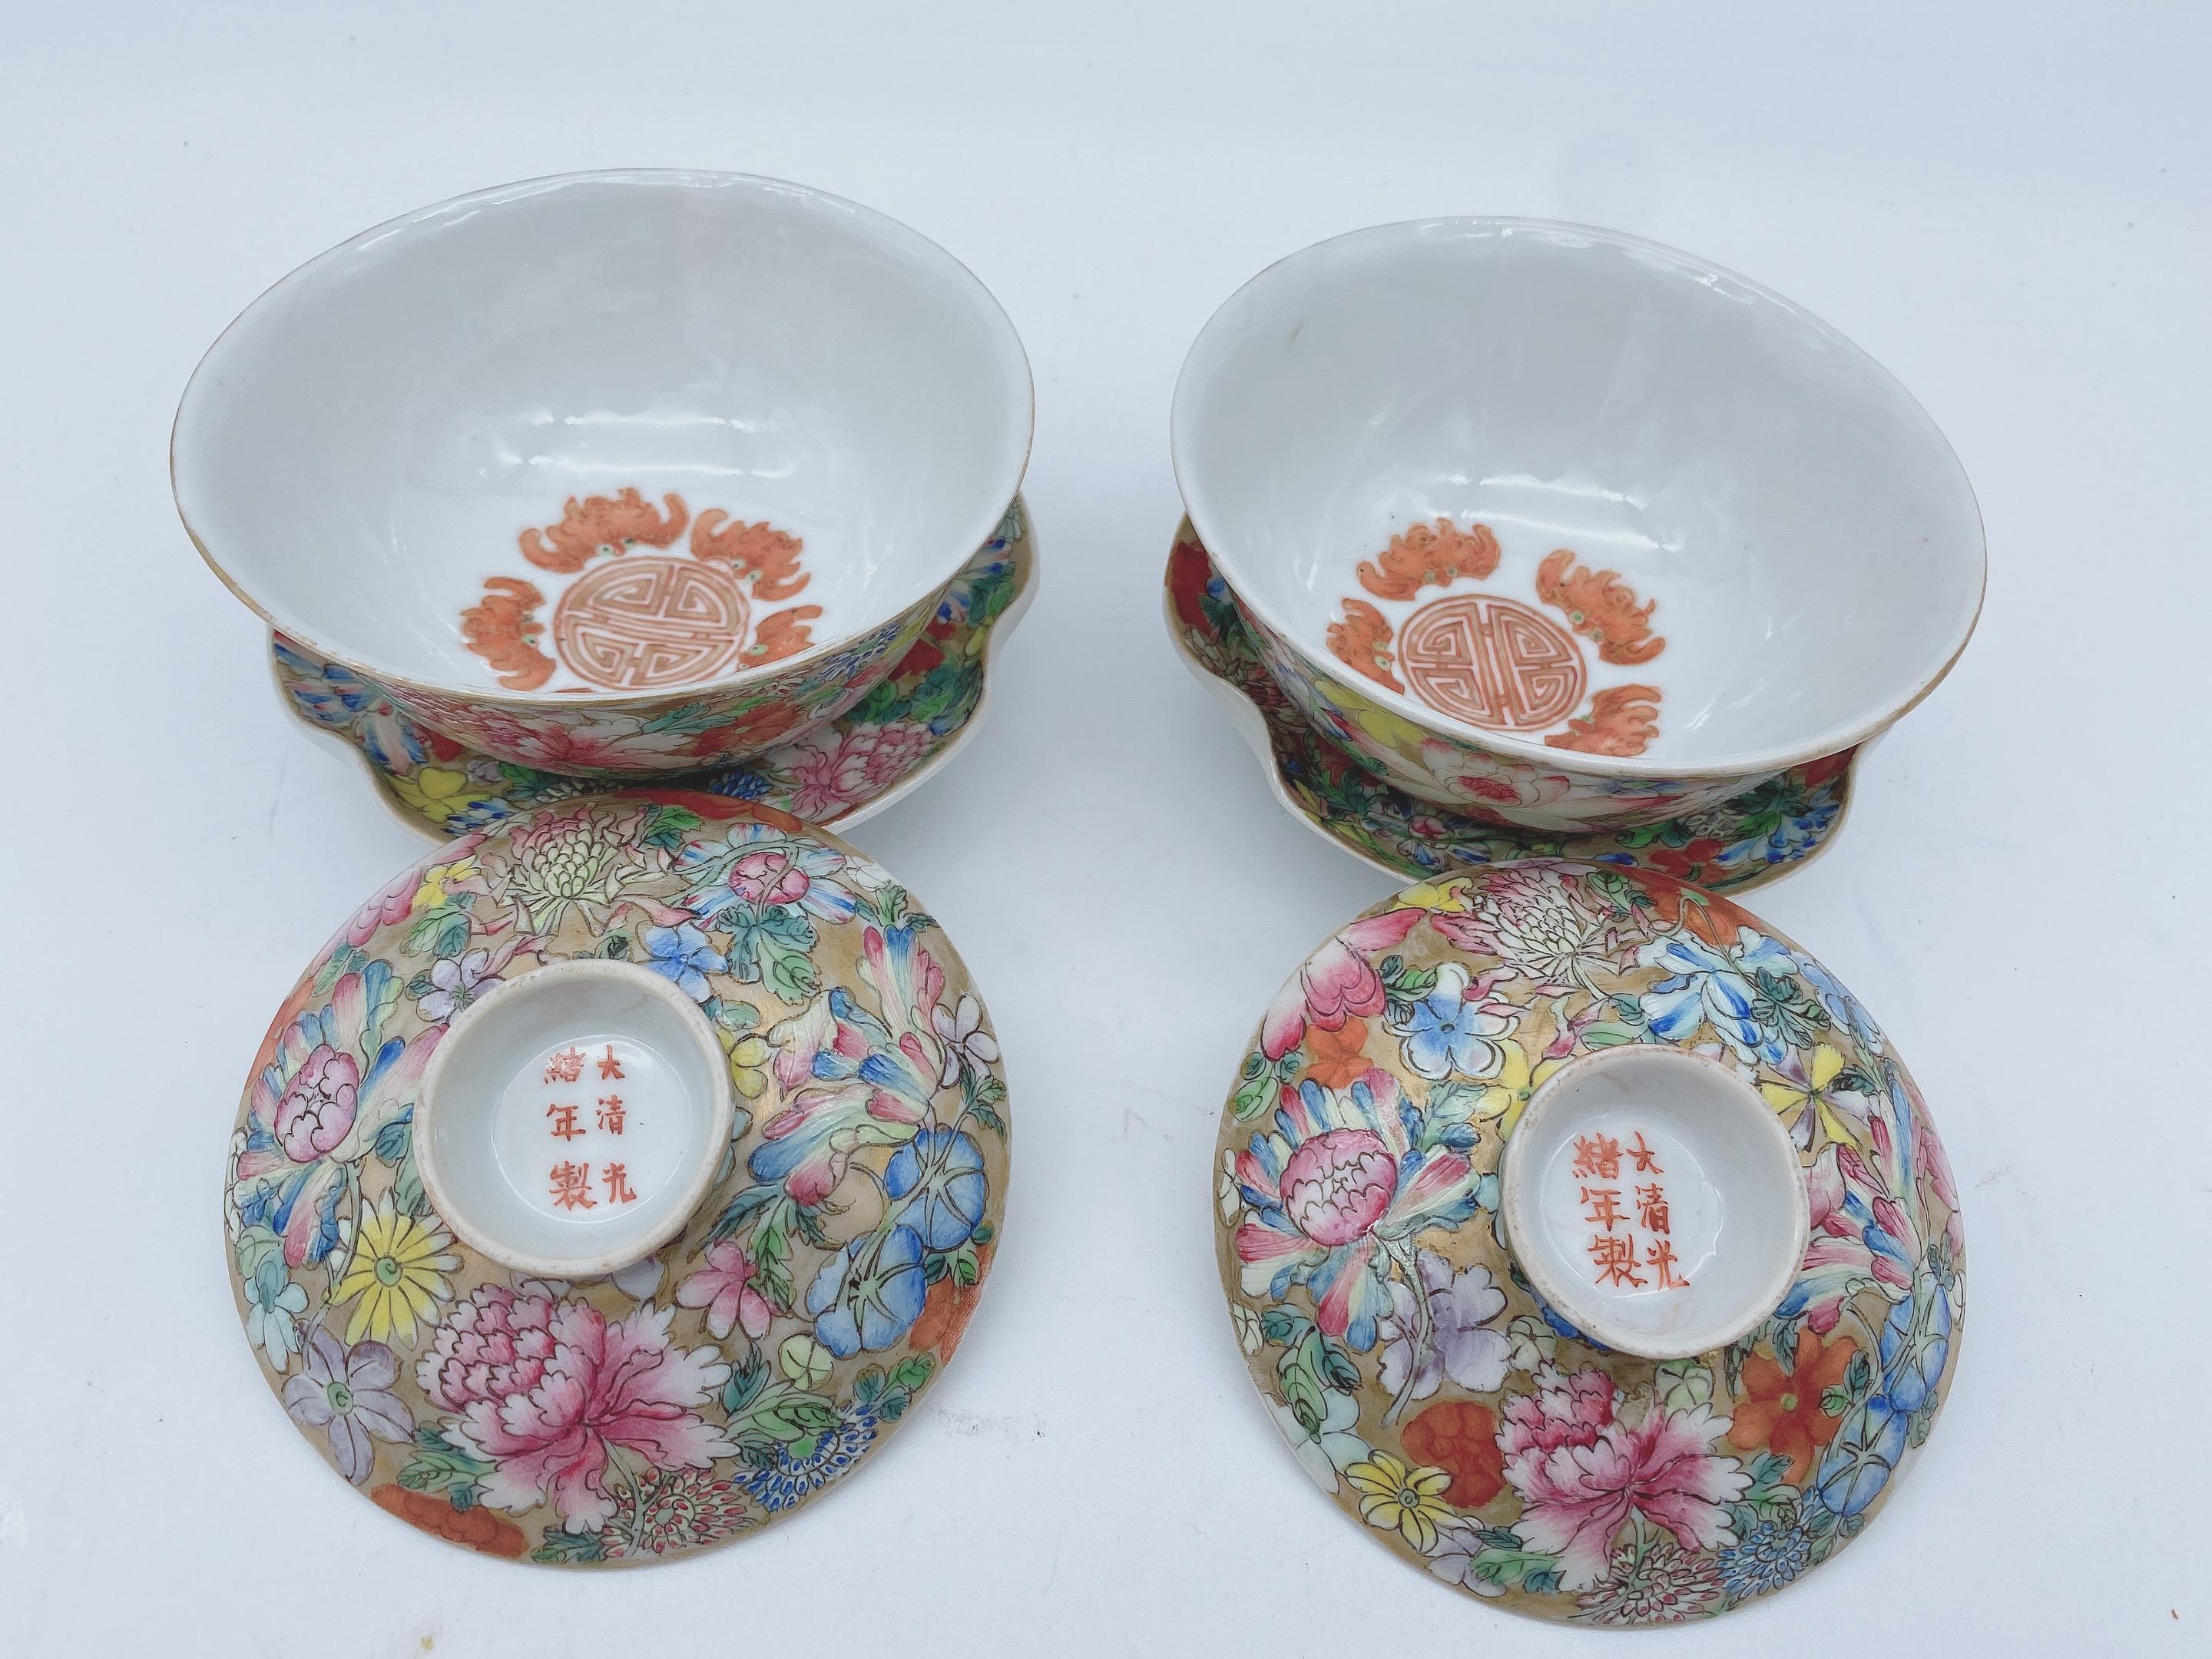 Pair of 19th Century Chinese Flower-Blossom Porcelain Cups with Cover and Base In Good Condition For Sale In Brea, CA